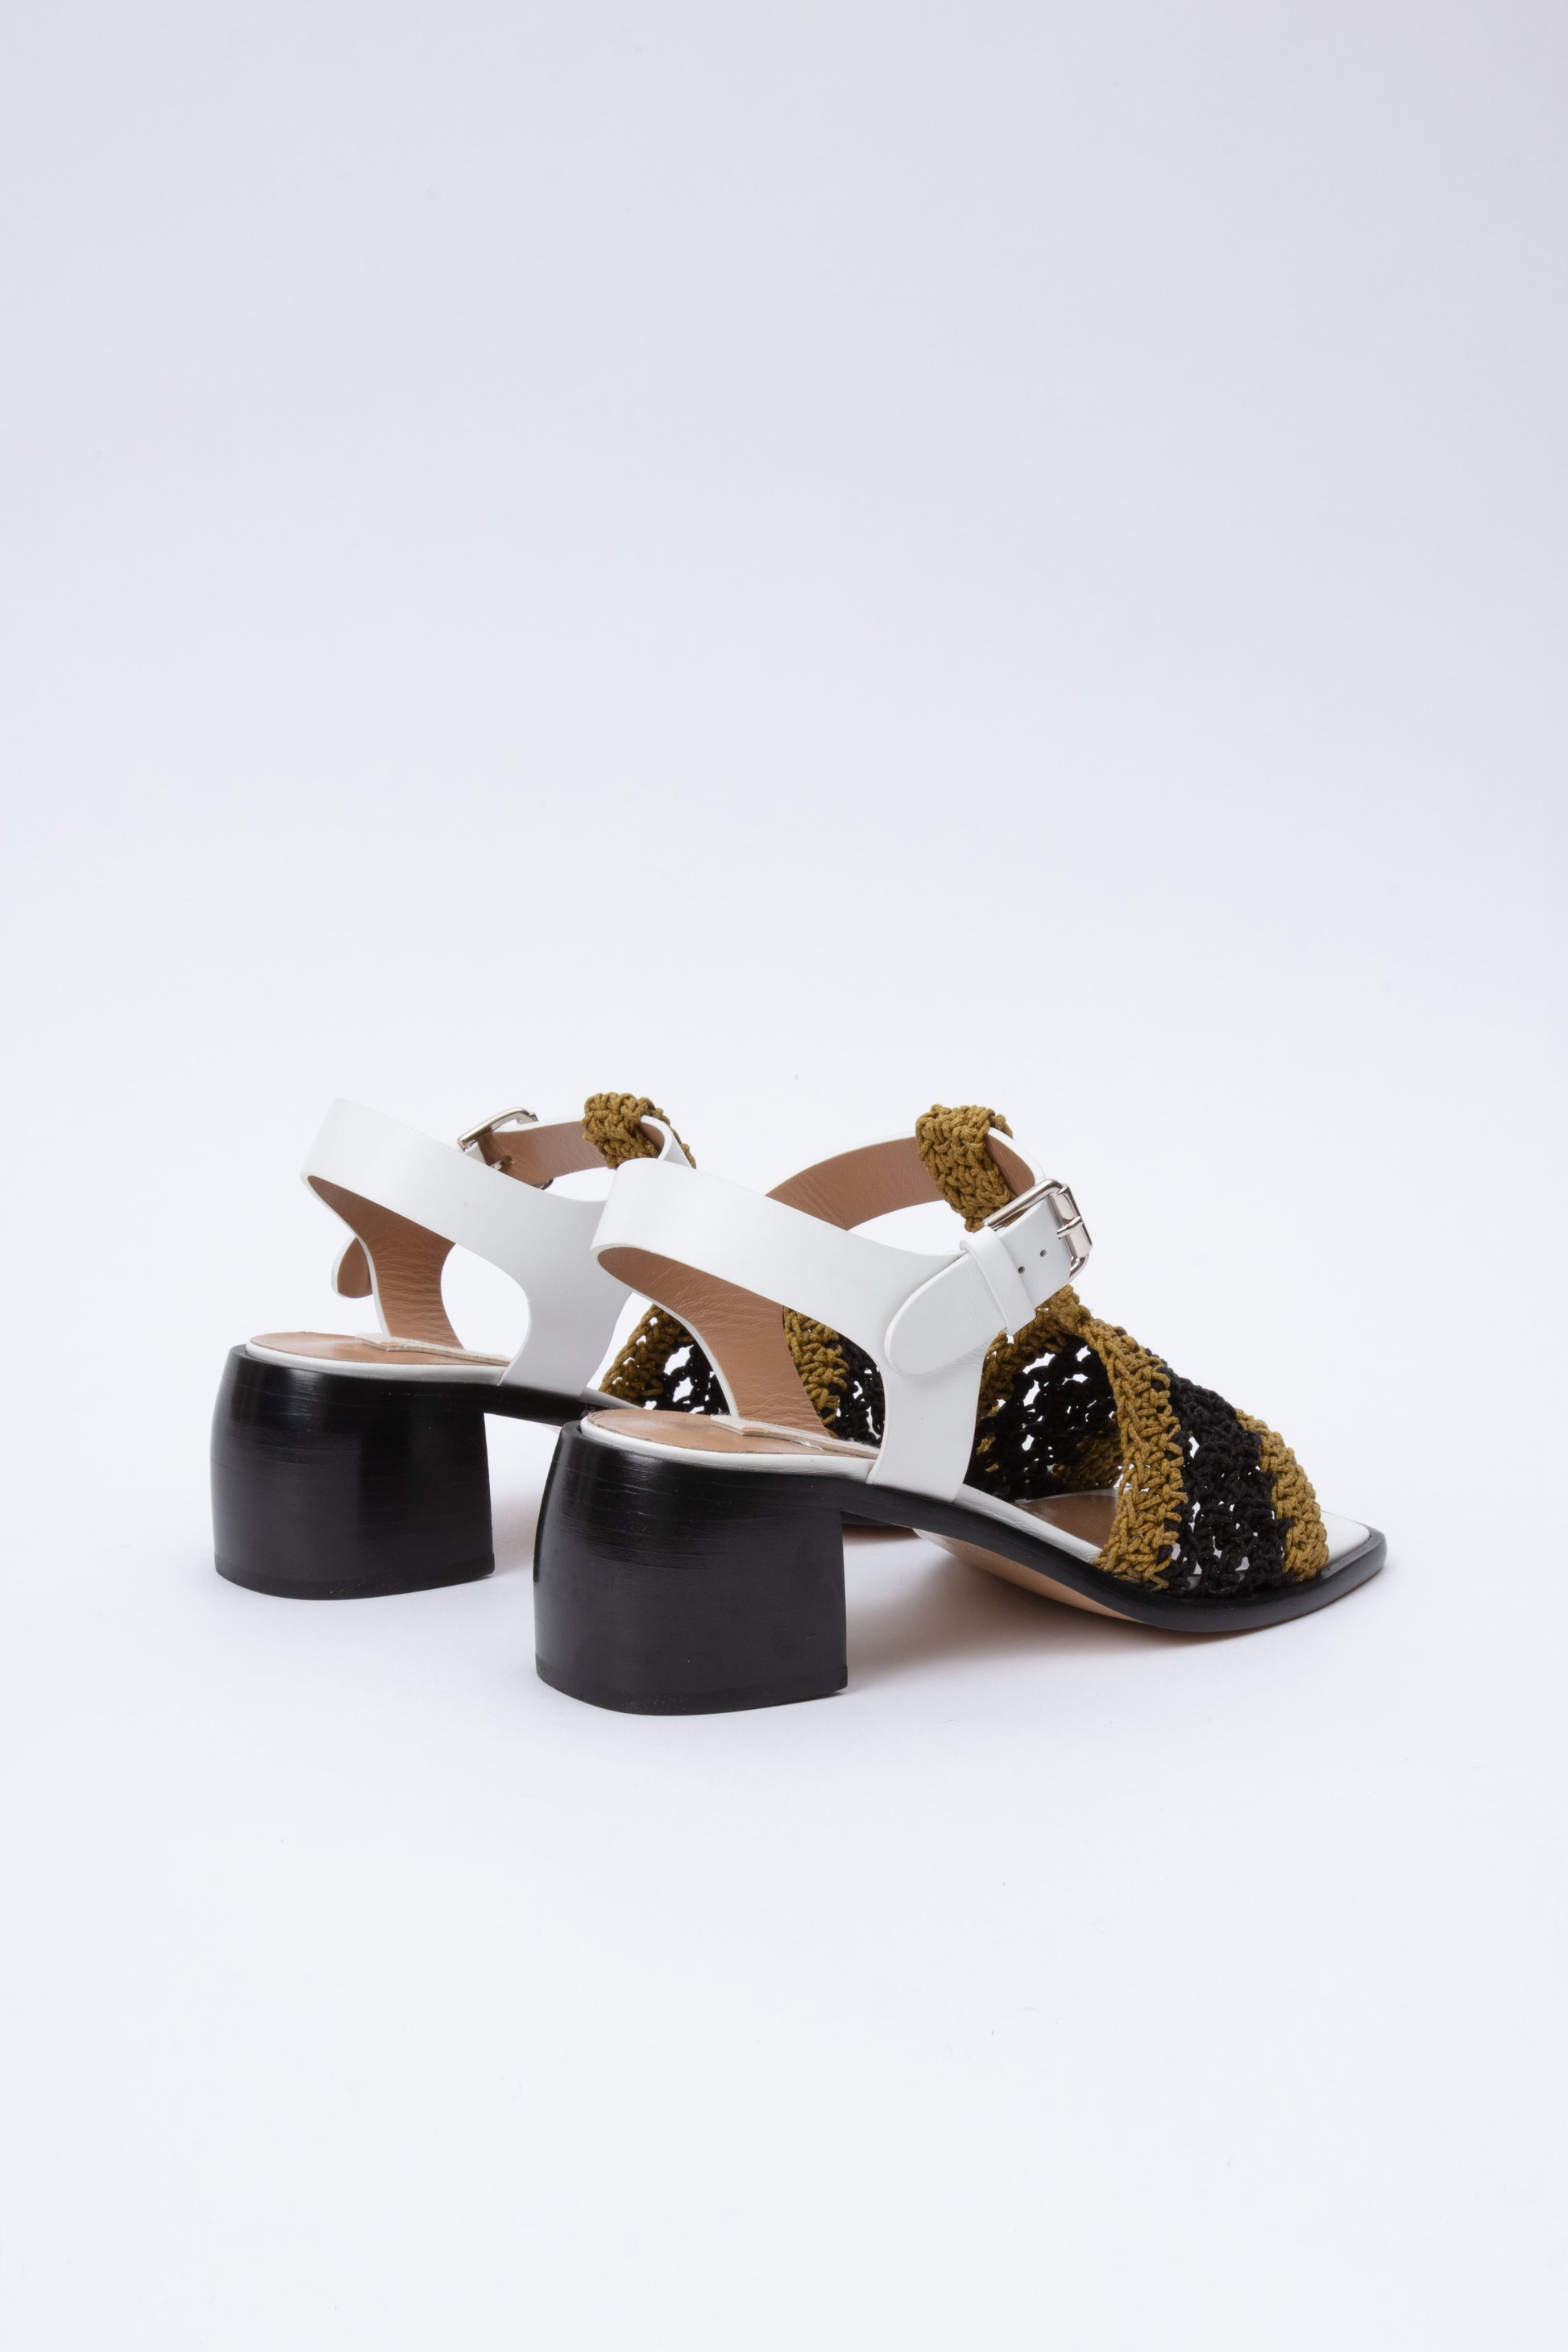 Open toe sandals with black leather base and white leather ankle straps. The block heel is slightly rounded and thick. Connected to the ankle strap is a toe strap made from hand-knit crochet in a cumin yellow and black. 